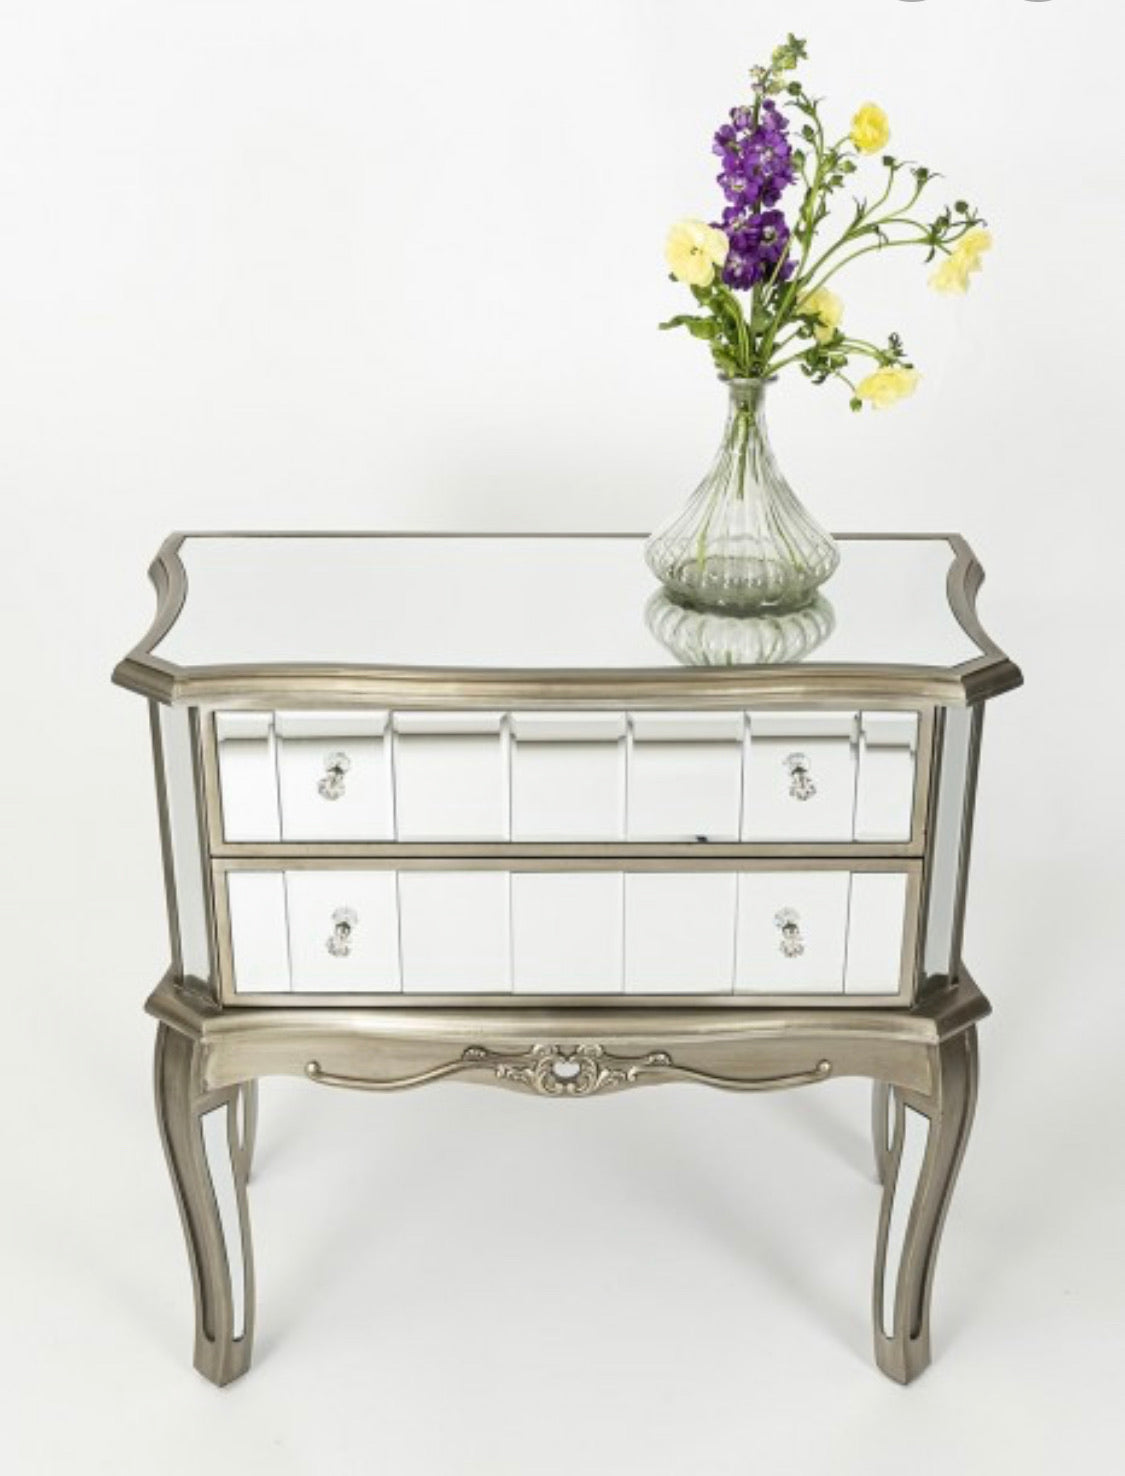 Annabelle French style mirrored 2 drawer wide chest of drawers 003  outlet clearance set of 2 view instore to purchase